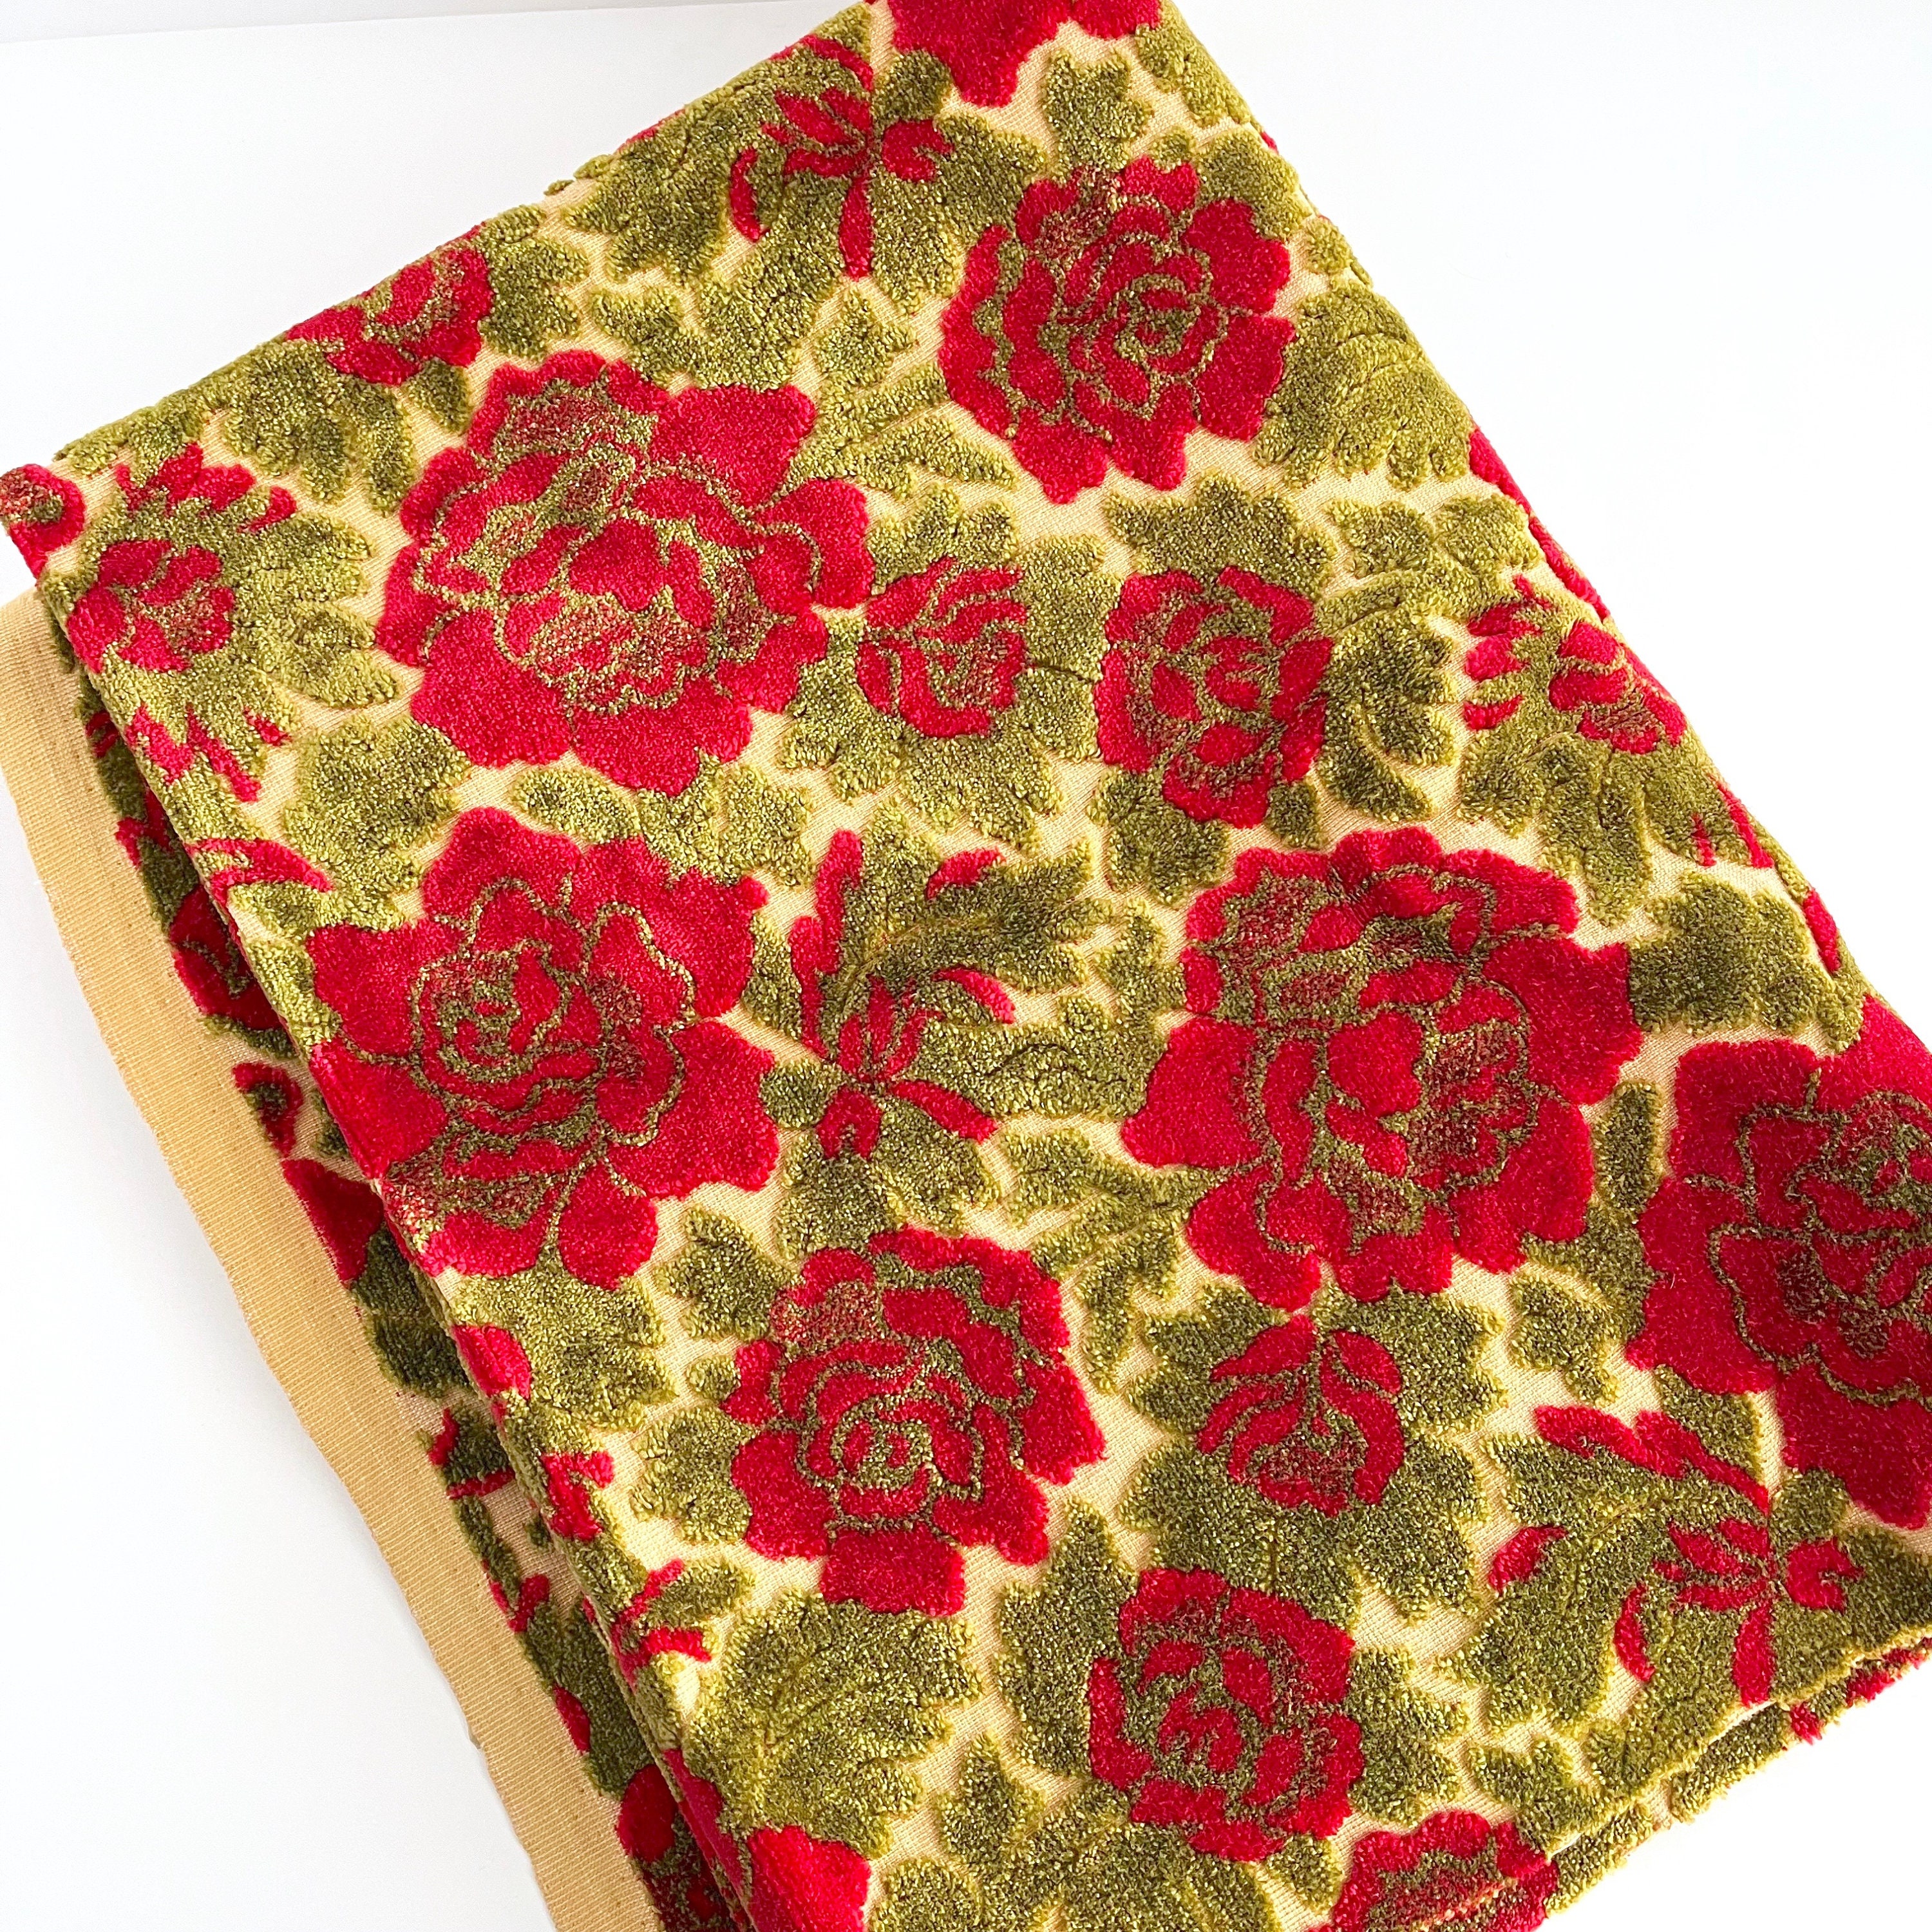 Red Damask Printed Velvet Fabric by the Yard,velvet Fabric With Gold  Print,printed Velvet Fabric by the Yard,upholstery Fabric,curtain Fabri 